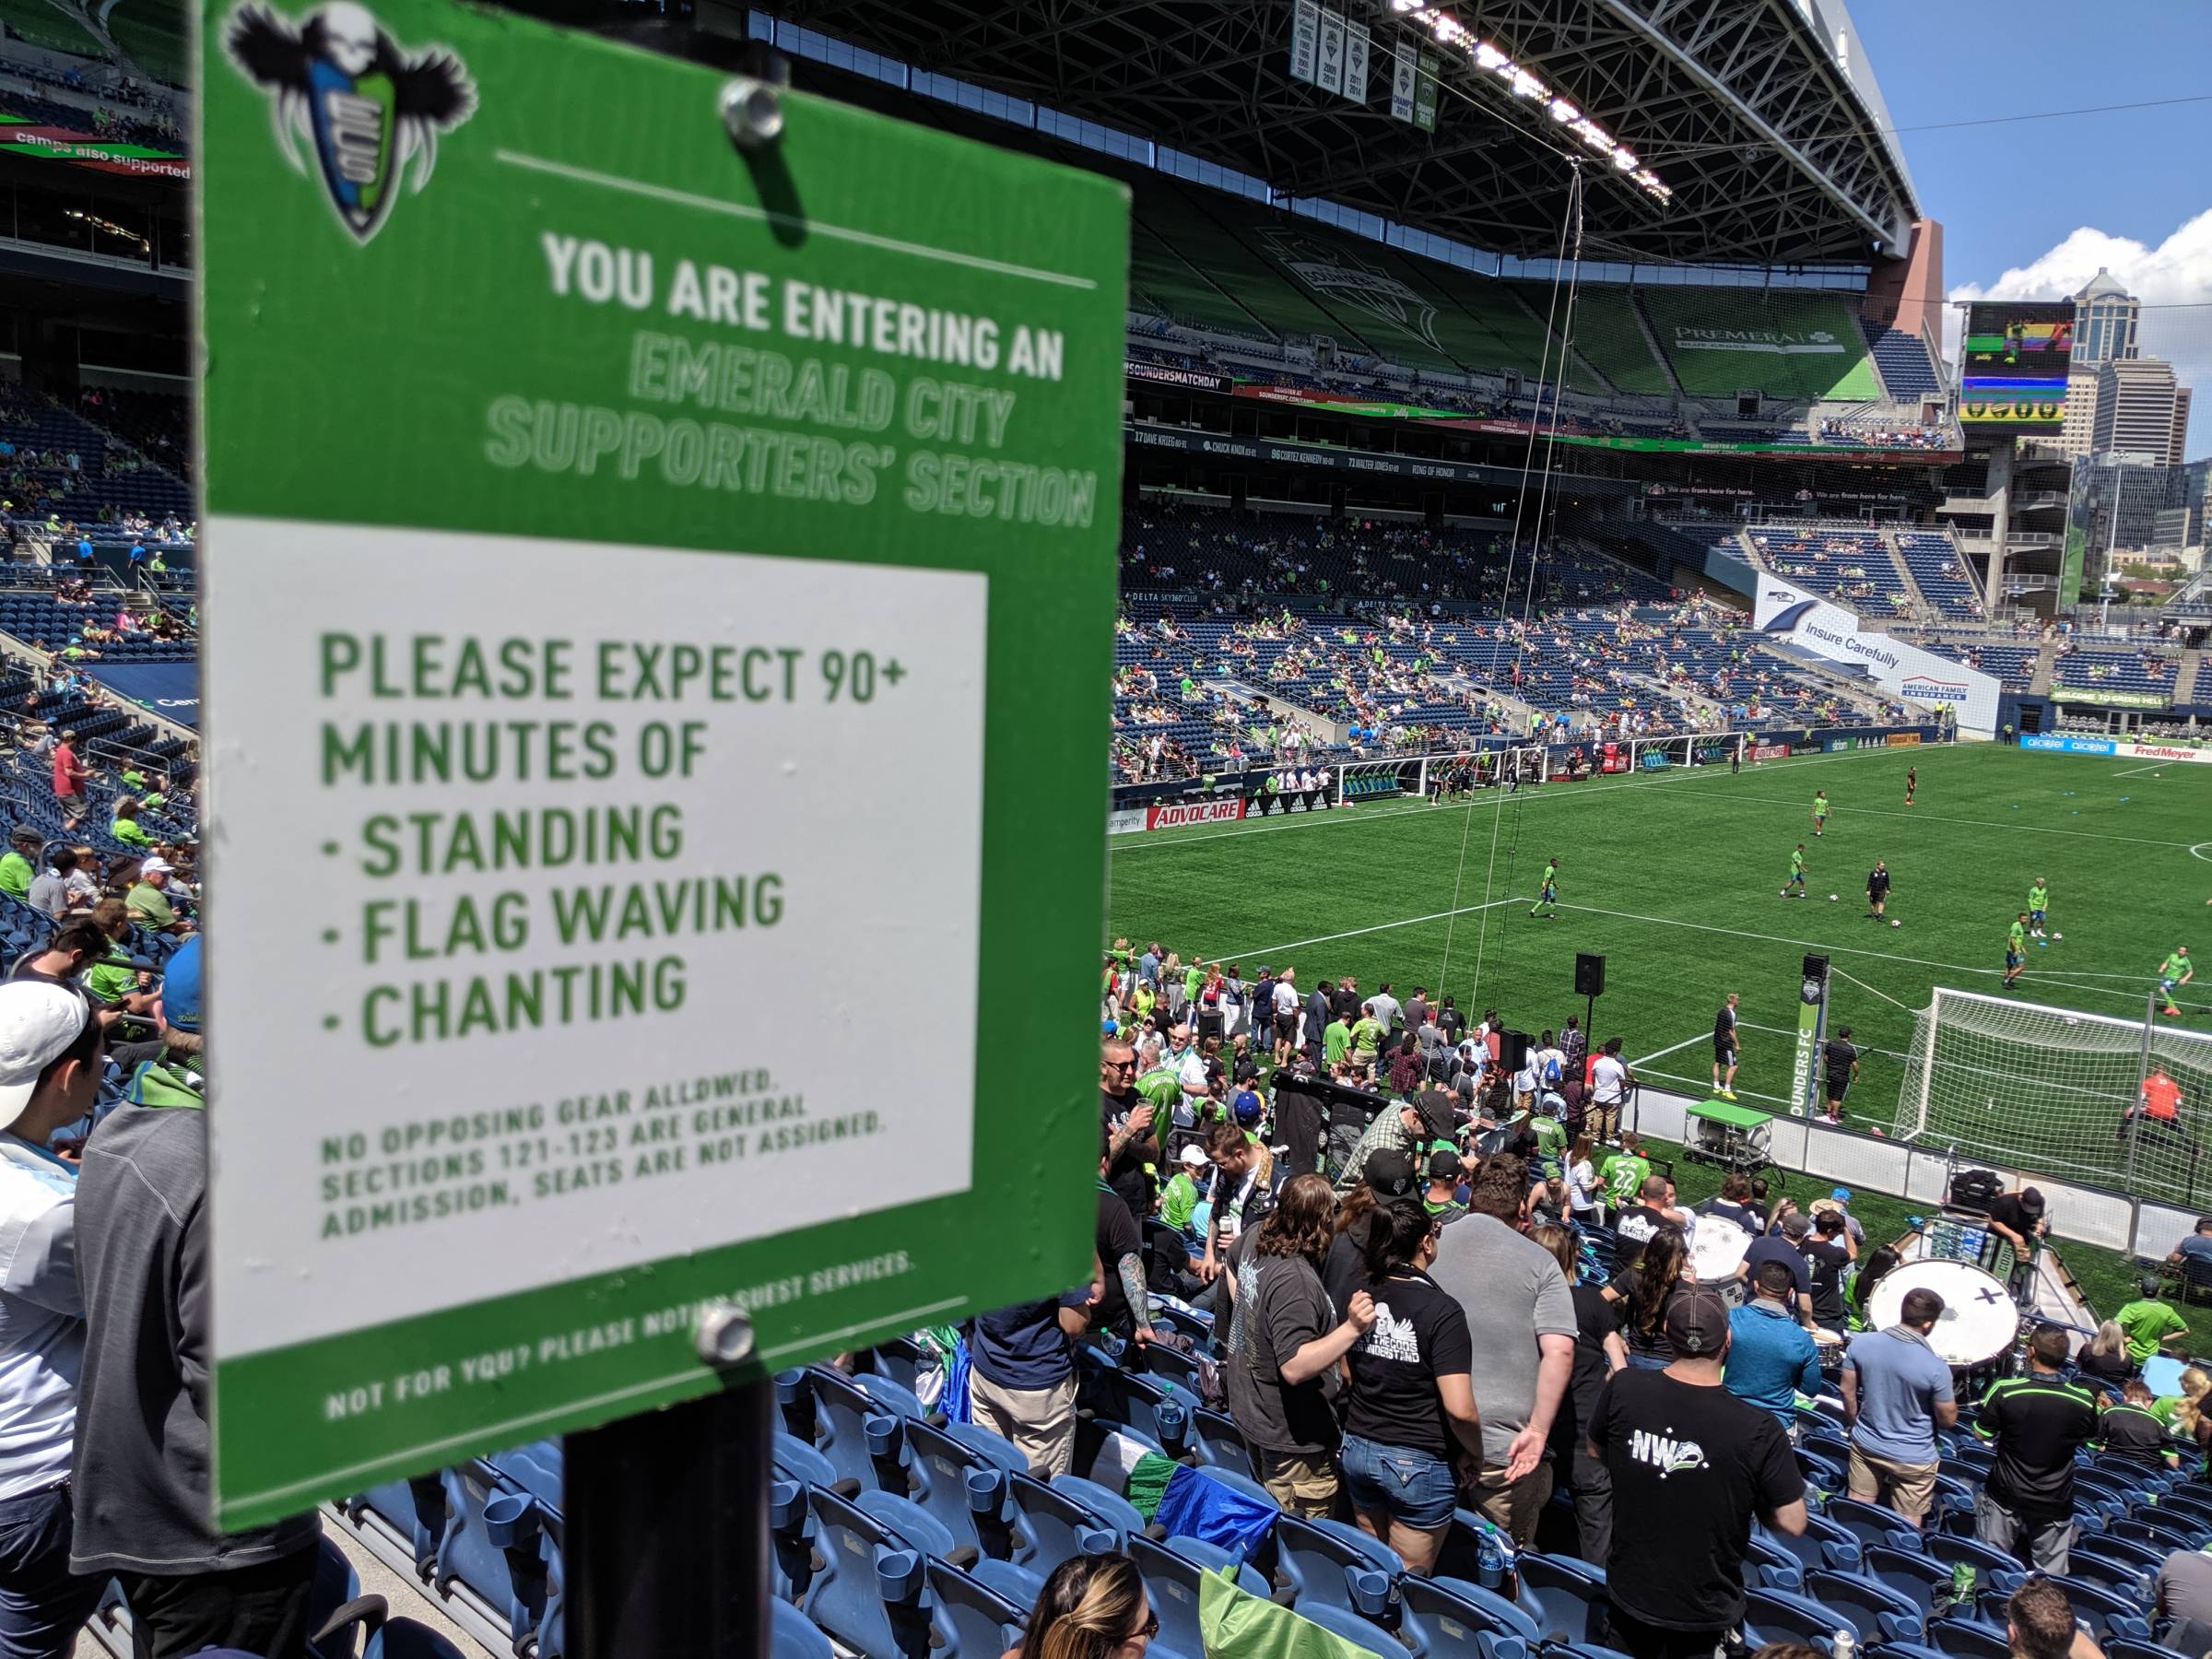 emerald city supporters rules